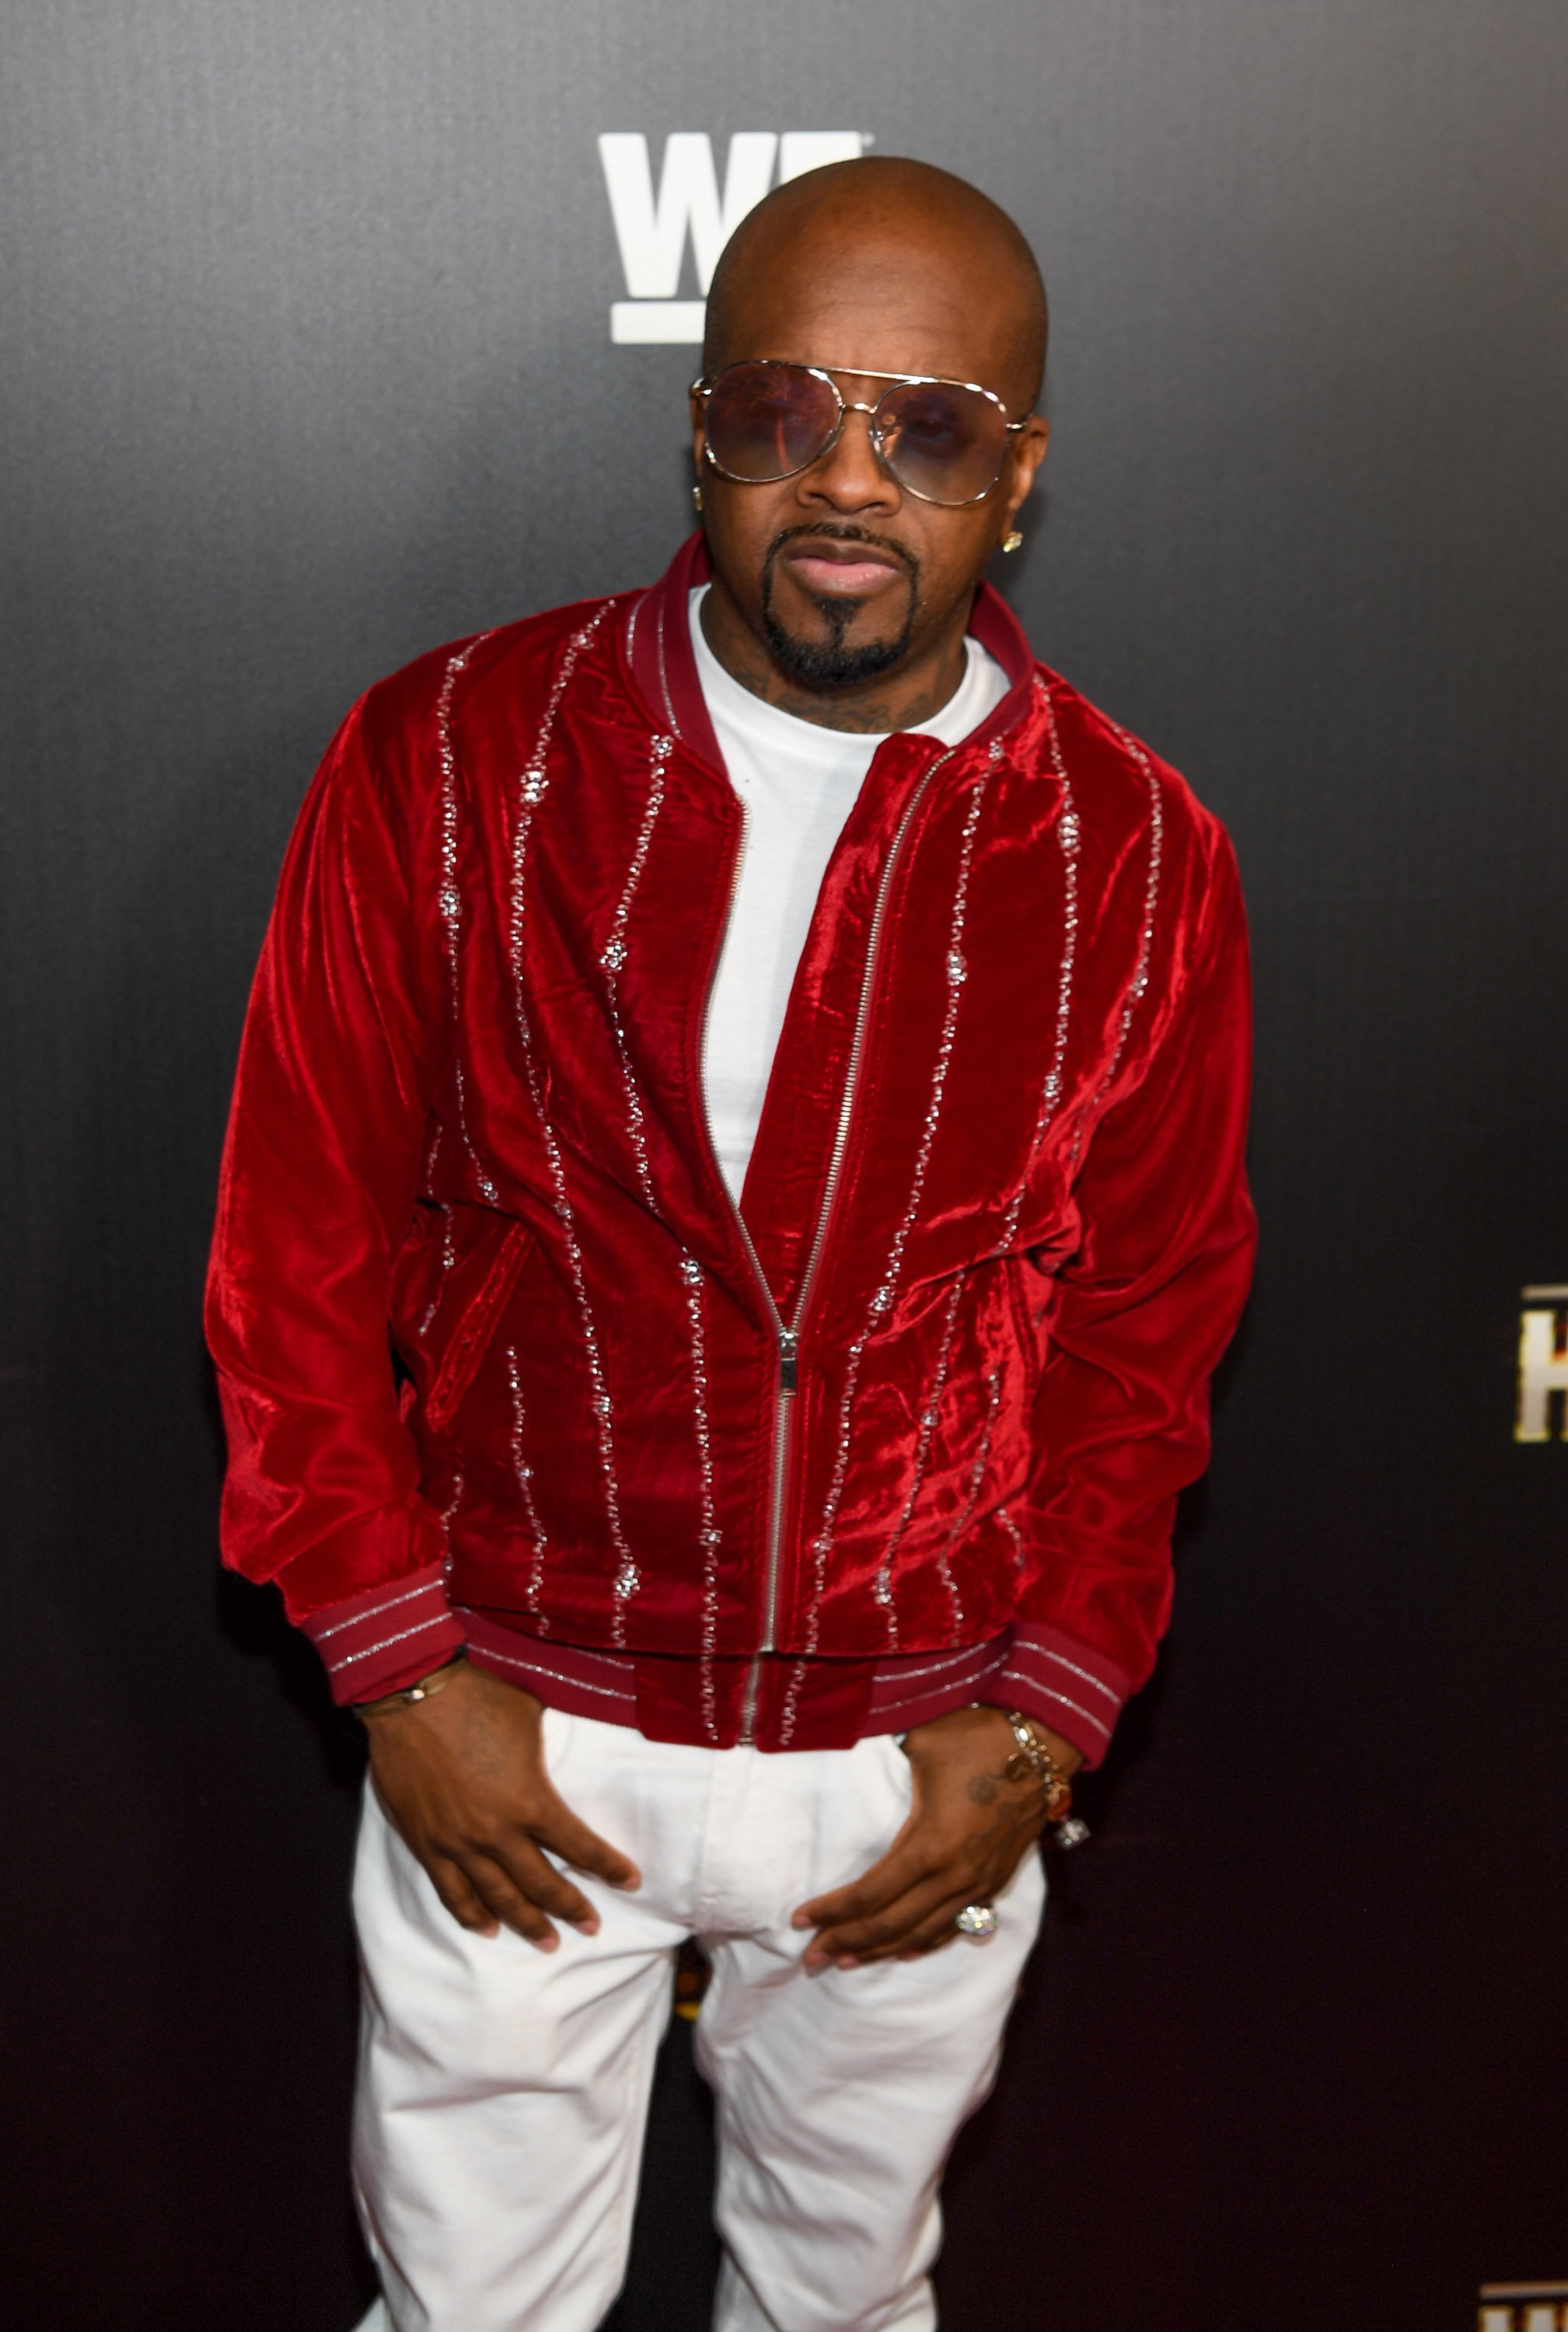  Jermaine Dupri attends "Growing Up Hip Hop Atlanta" season 2 premiere party at Woodruff Arts Center on January 9, 2018. | Photo: GettyImages